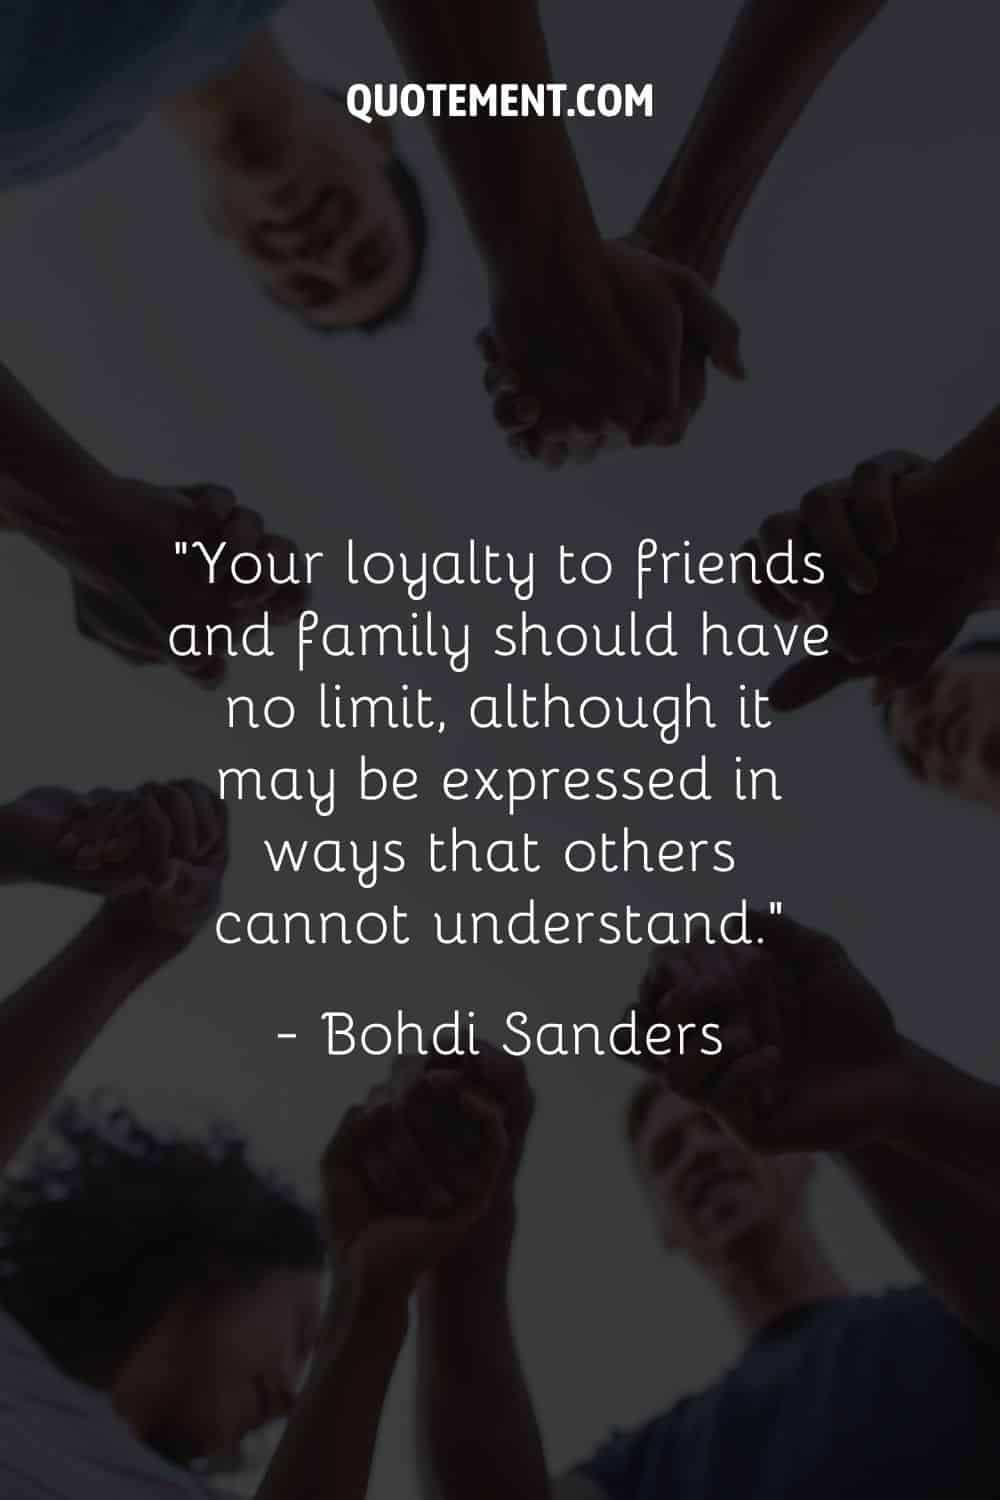 “Your loyalty to friends and family should have no limit, although it may be expressed in ways that others cannot understand.” ― Bohdi Sanders